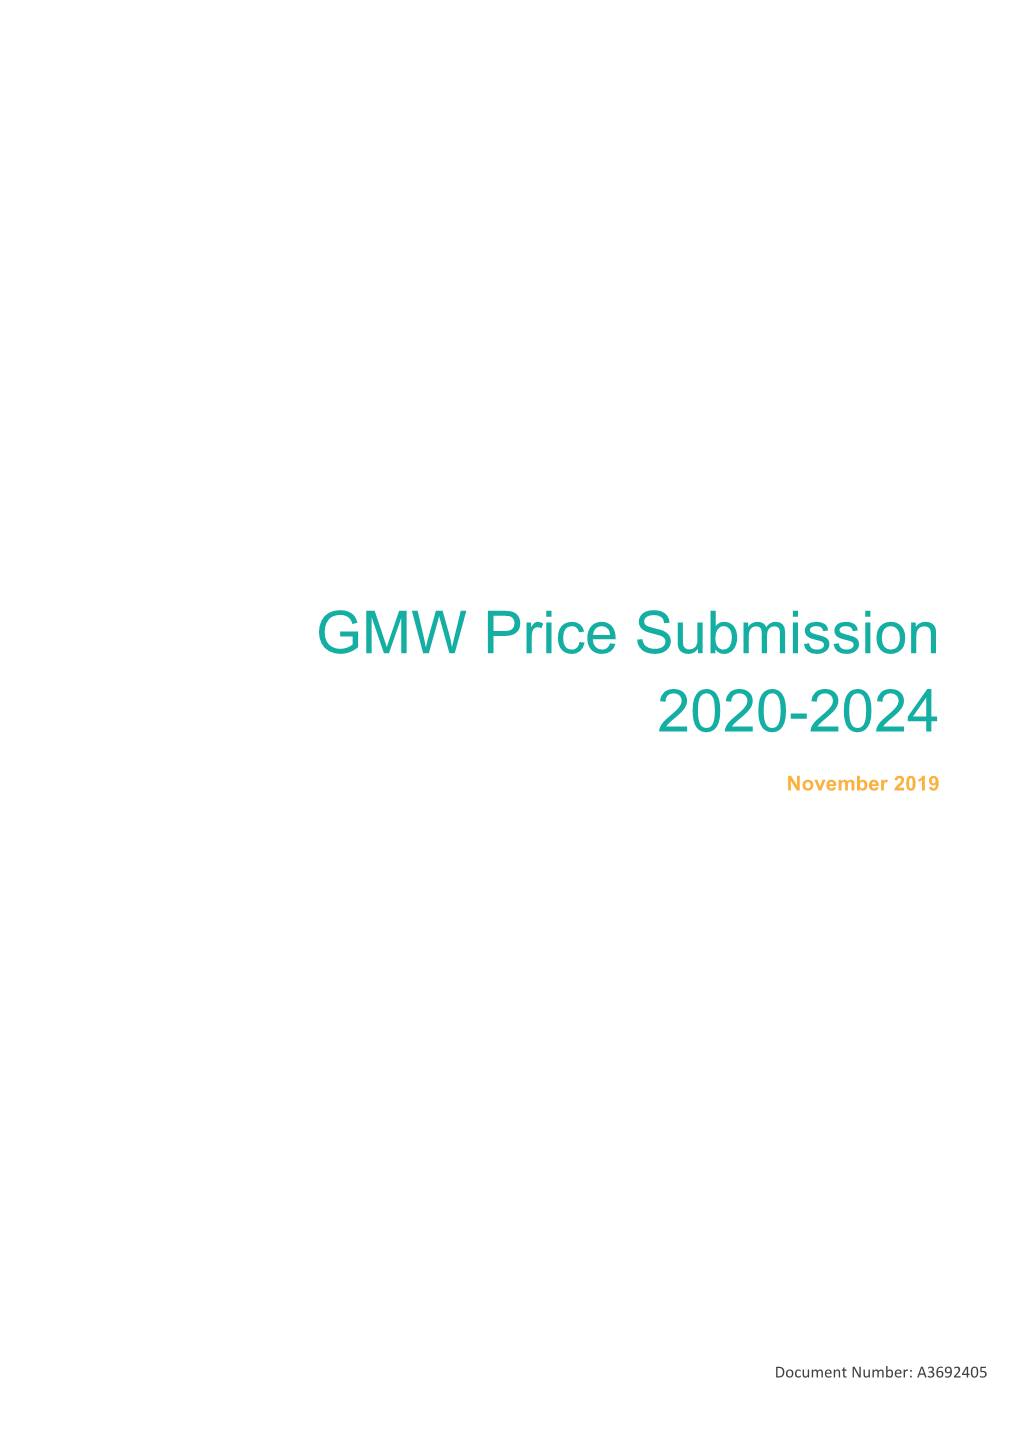 GMW Price Submission 2020-2024